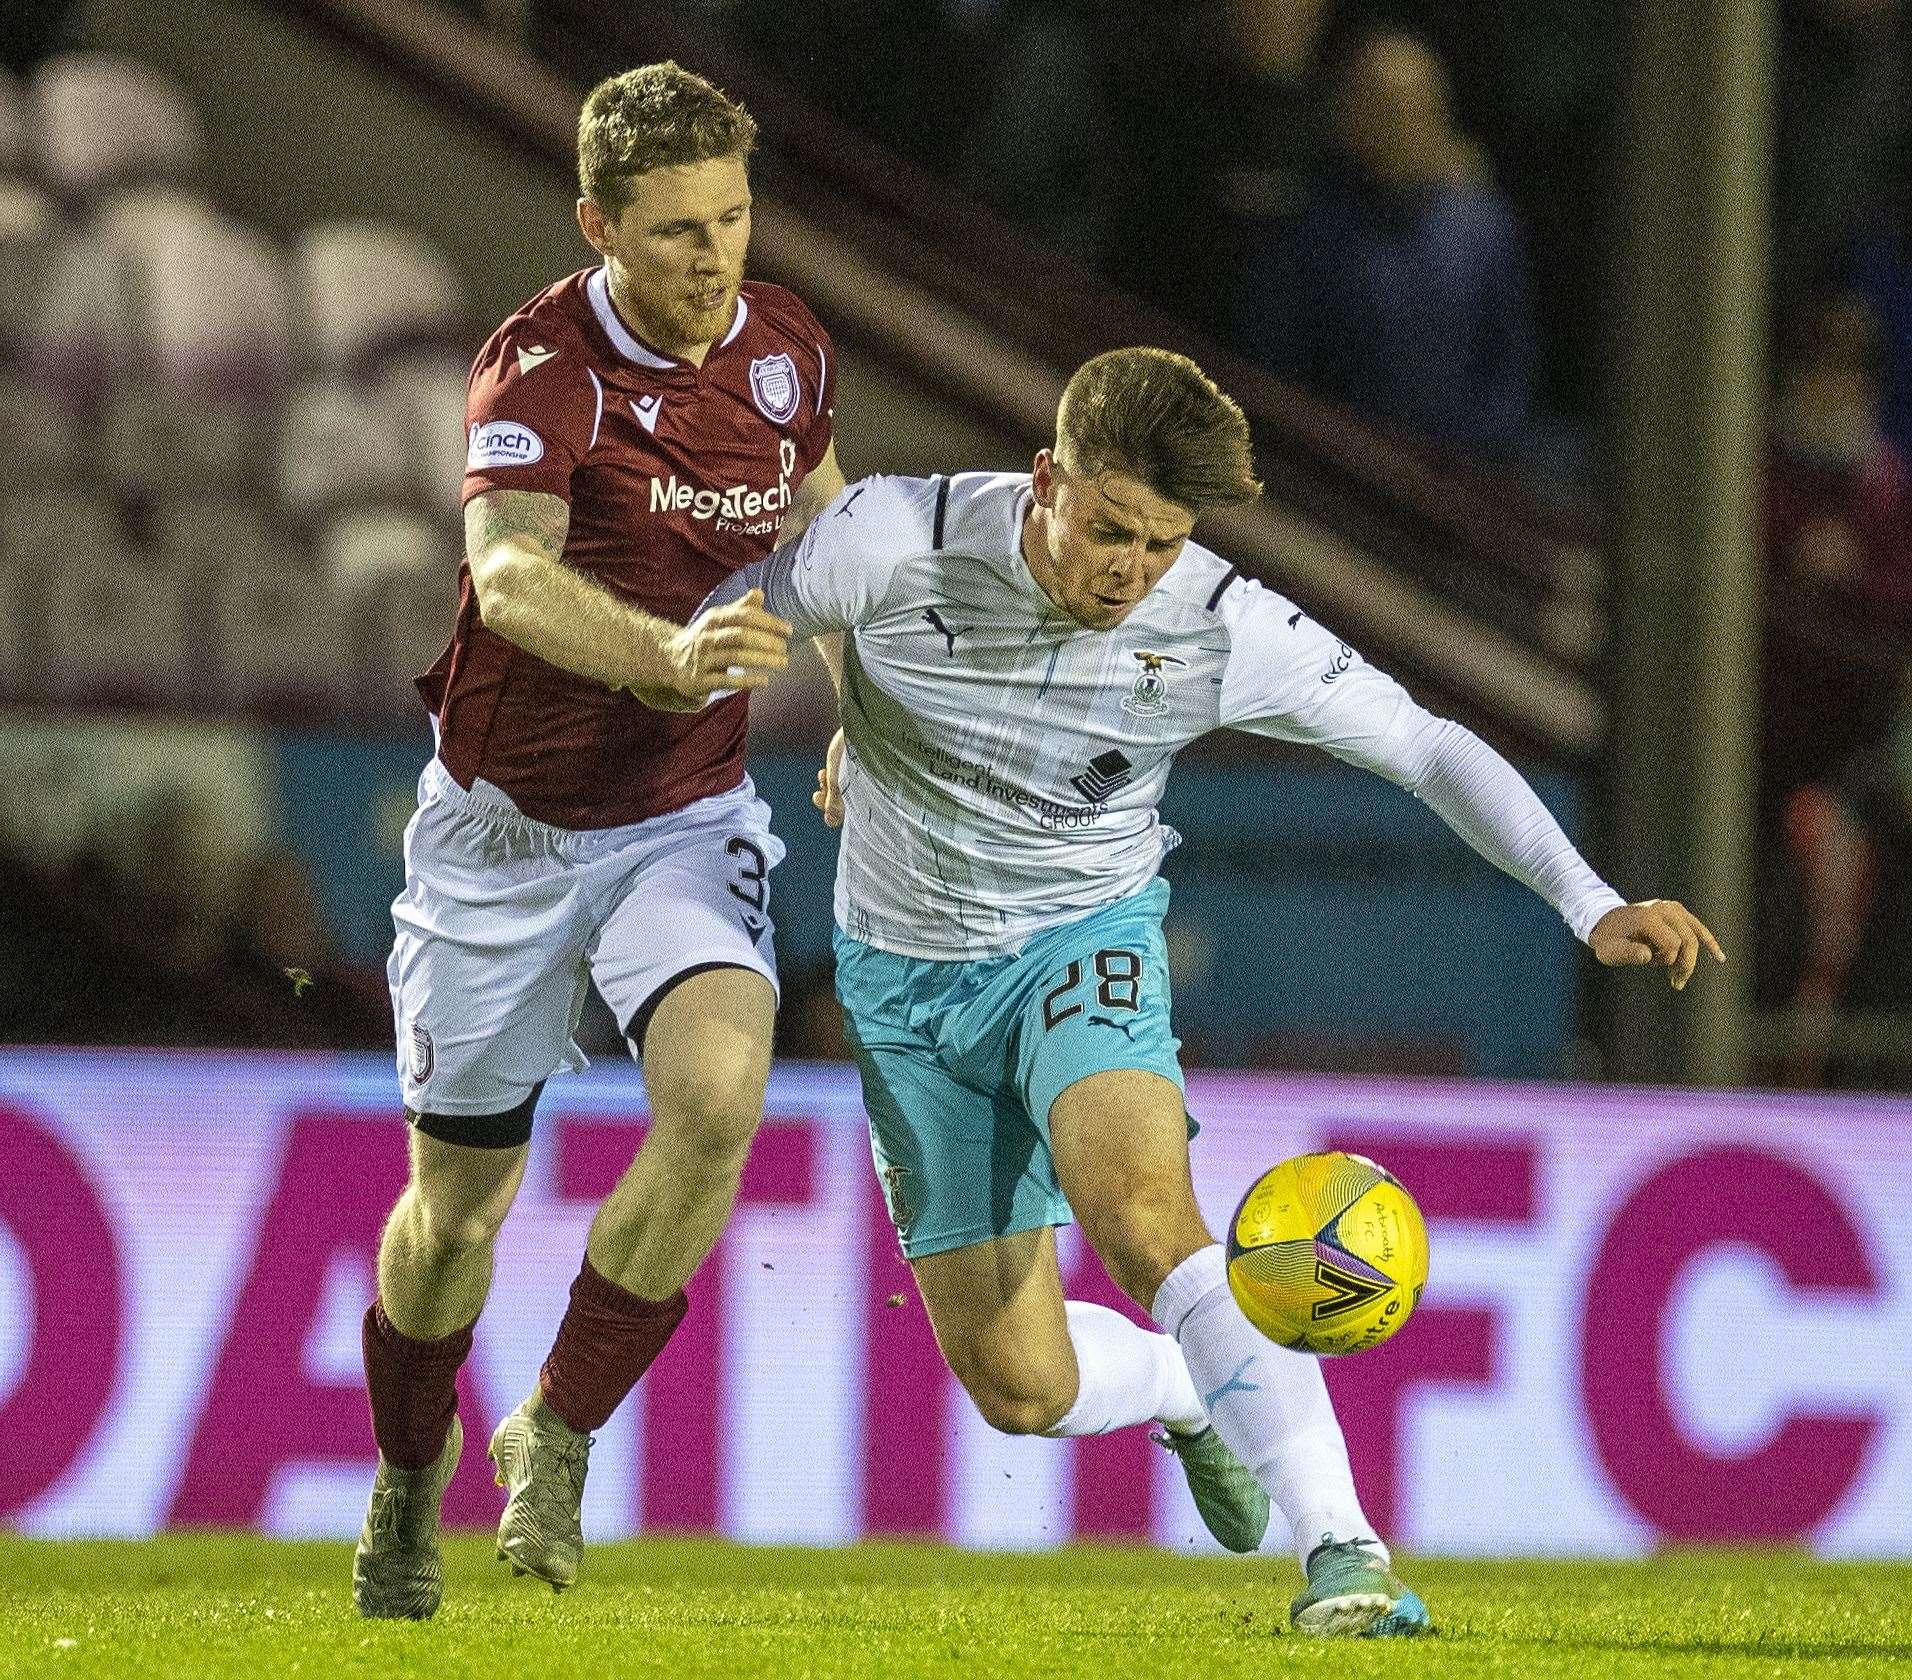 Lewis Hyde has featured in three play-off games so far after becoming a fully-fledged first team player this season. Picture: Ken Macpherson